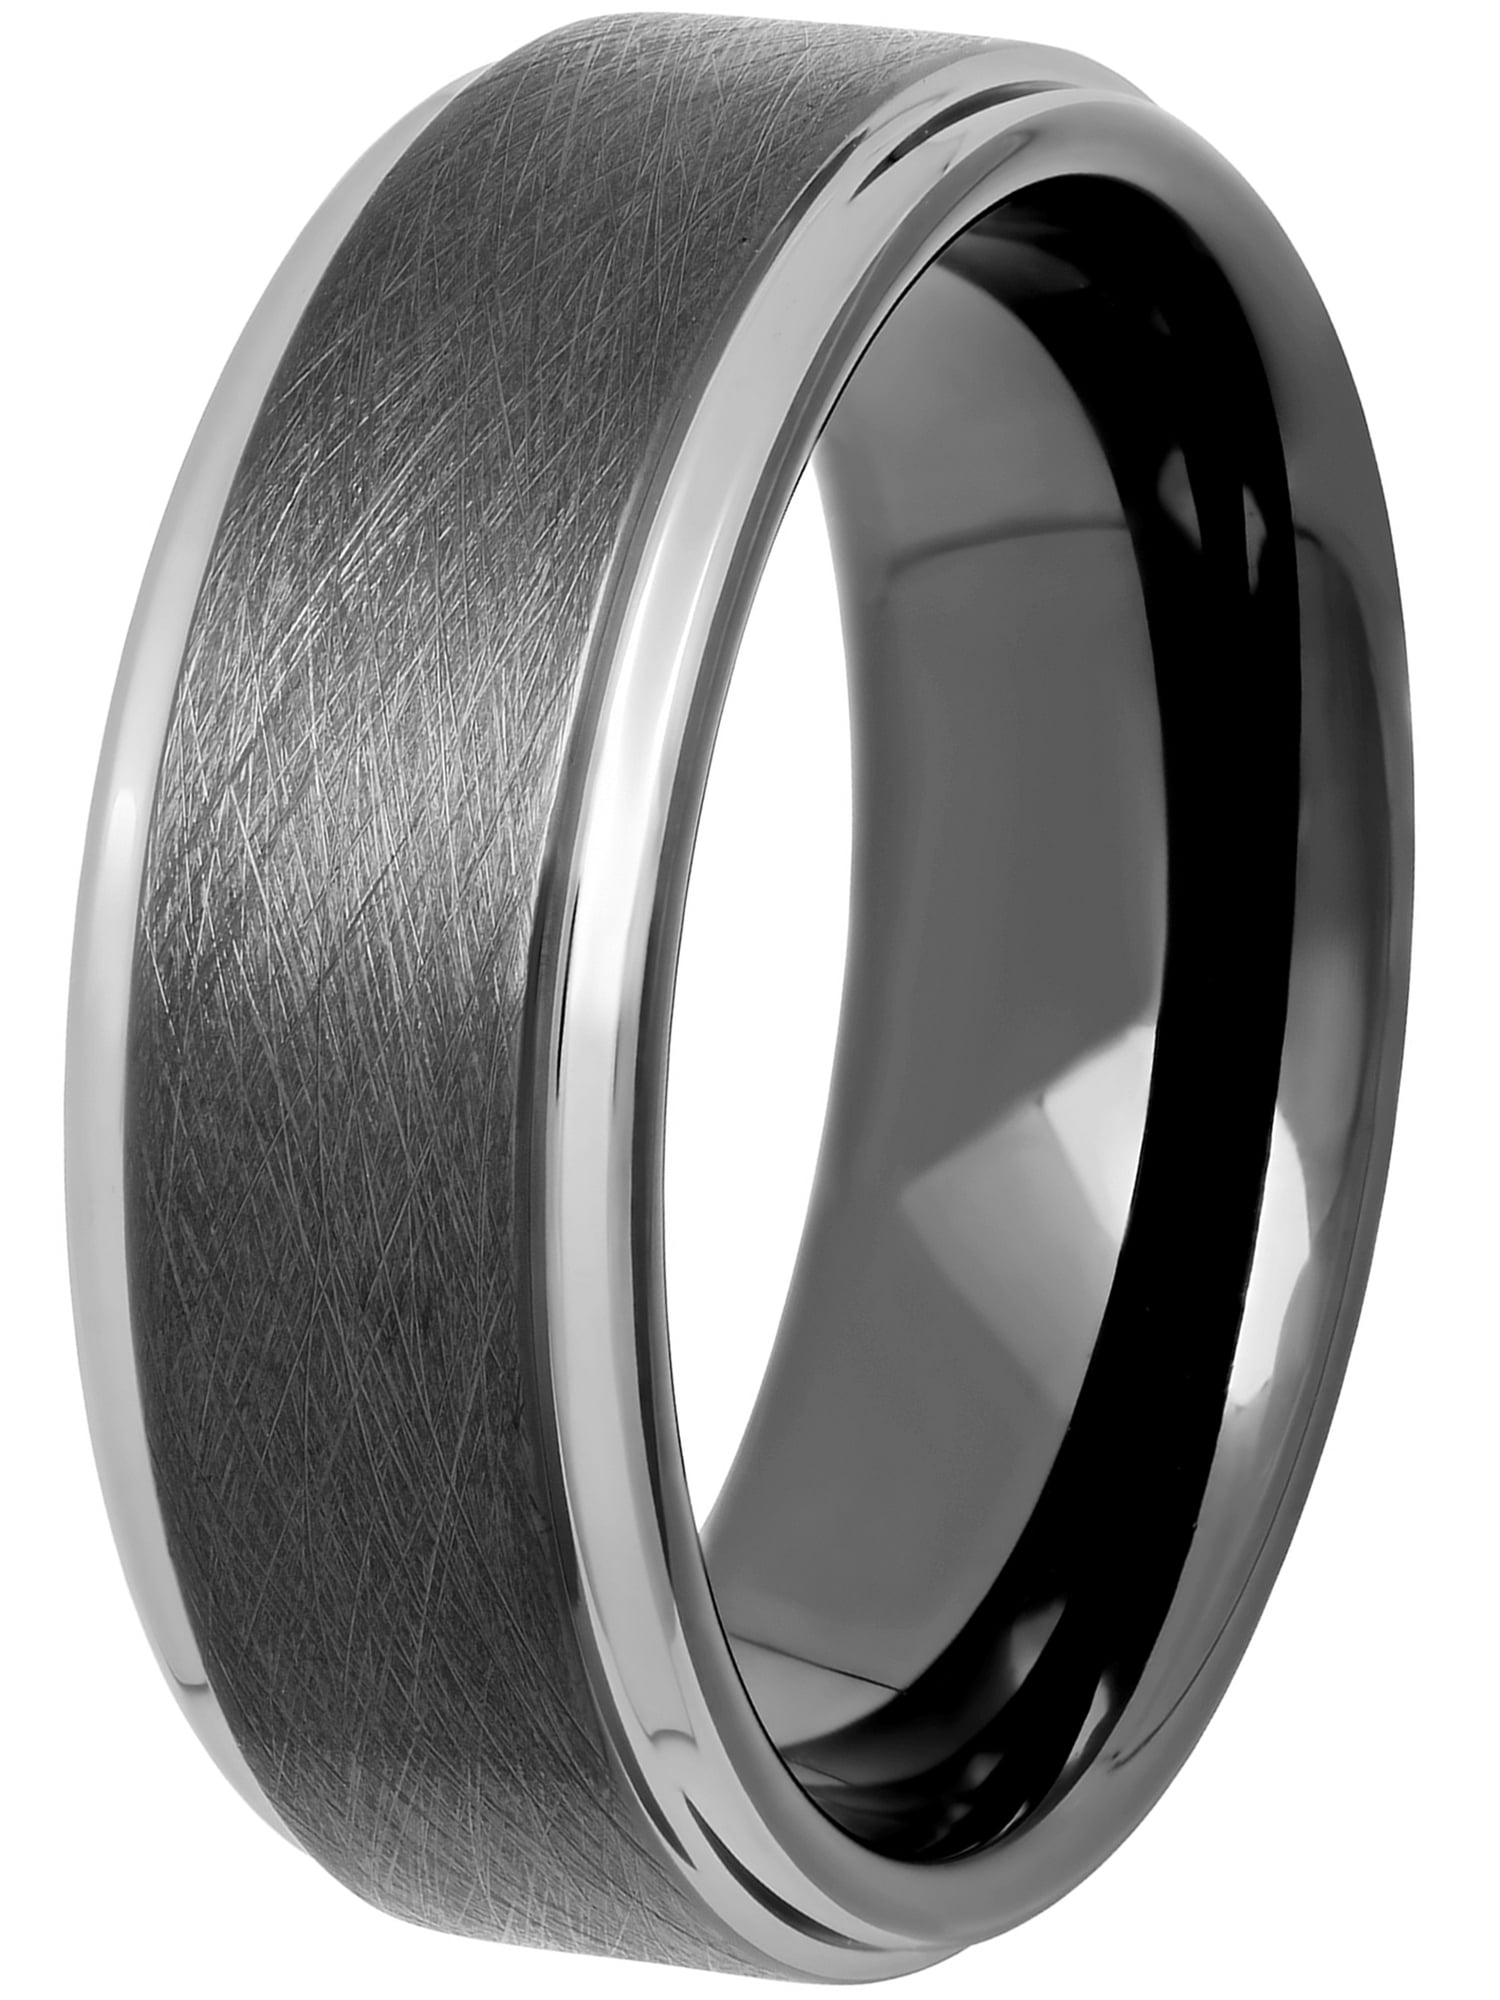 8mm Tungsten Black Multi-Faceted Wedding Band Ring Men's Jewelry sz 8-15